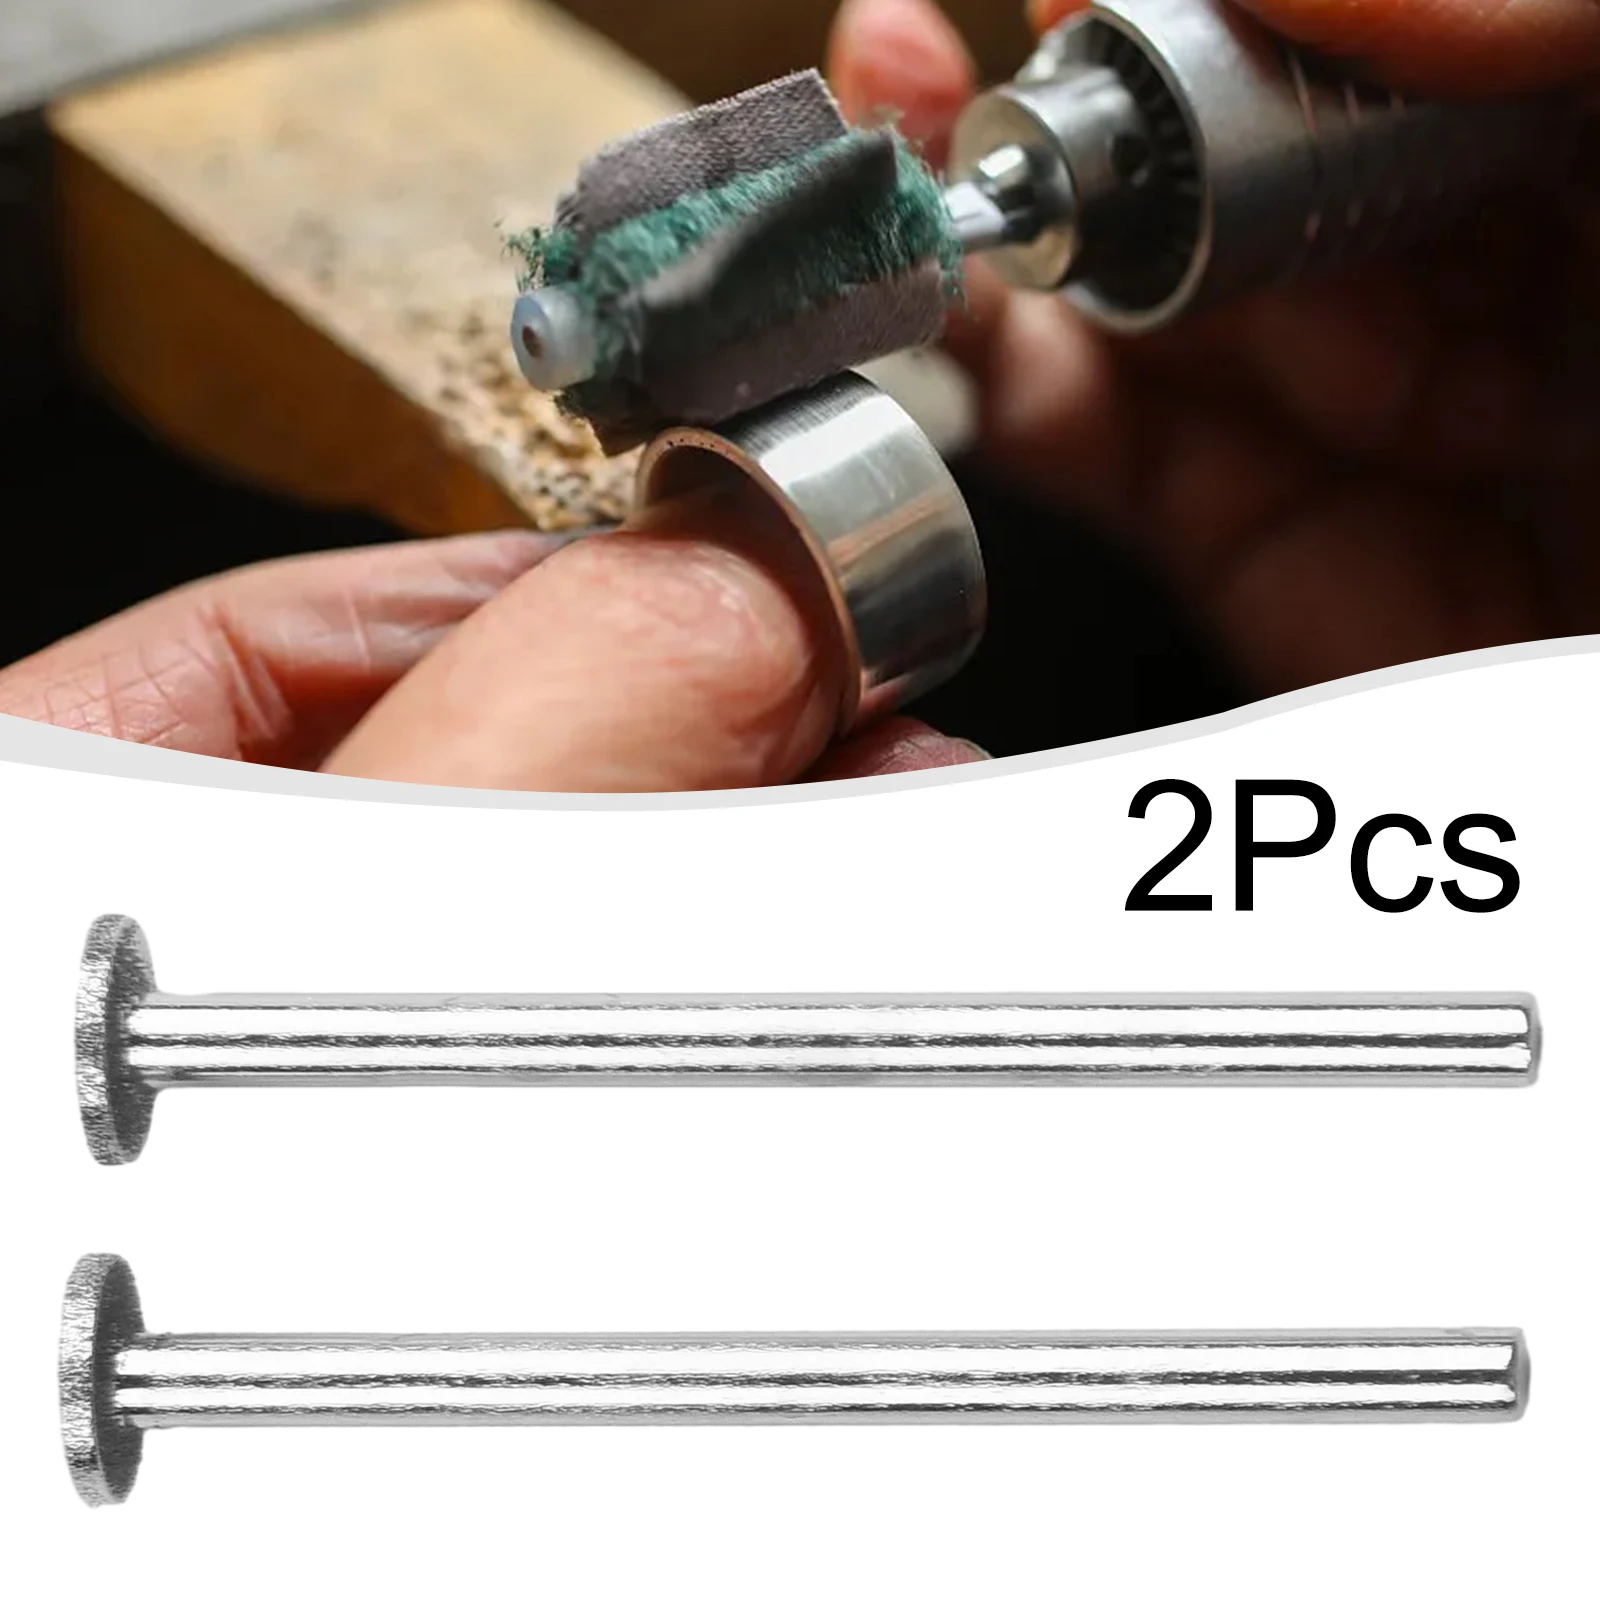 2pcs T Type Grinding Wheel 3mm Shank 6/8/10/10mm Head   45mm Length For The Polishing Of Jade Carving Stone Carving Welding Tool 2pcs 3 175mm diamond pen point engraving tools engraver cnc milling cutter circuit board metal stone aluminum carving tools bits